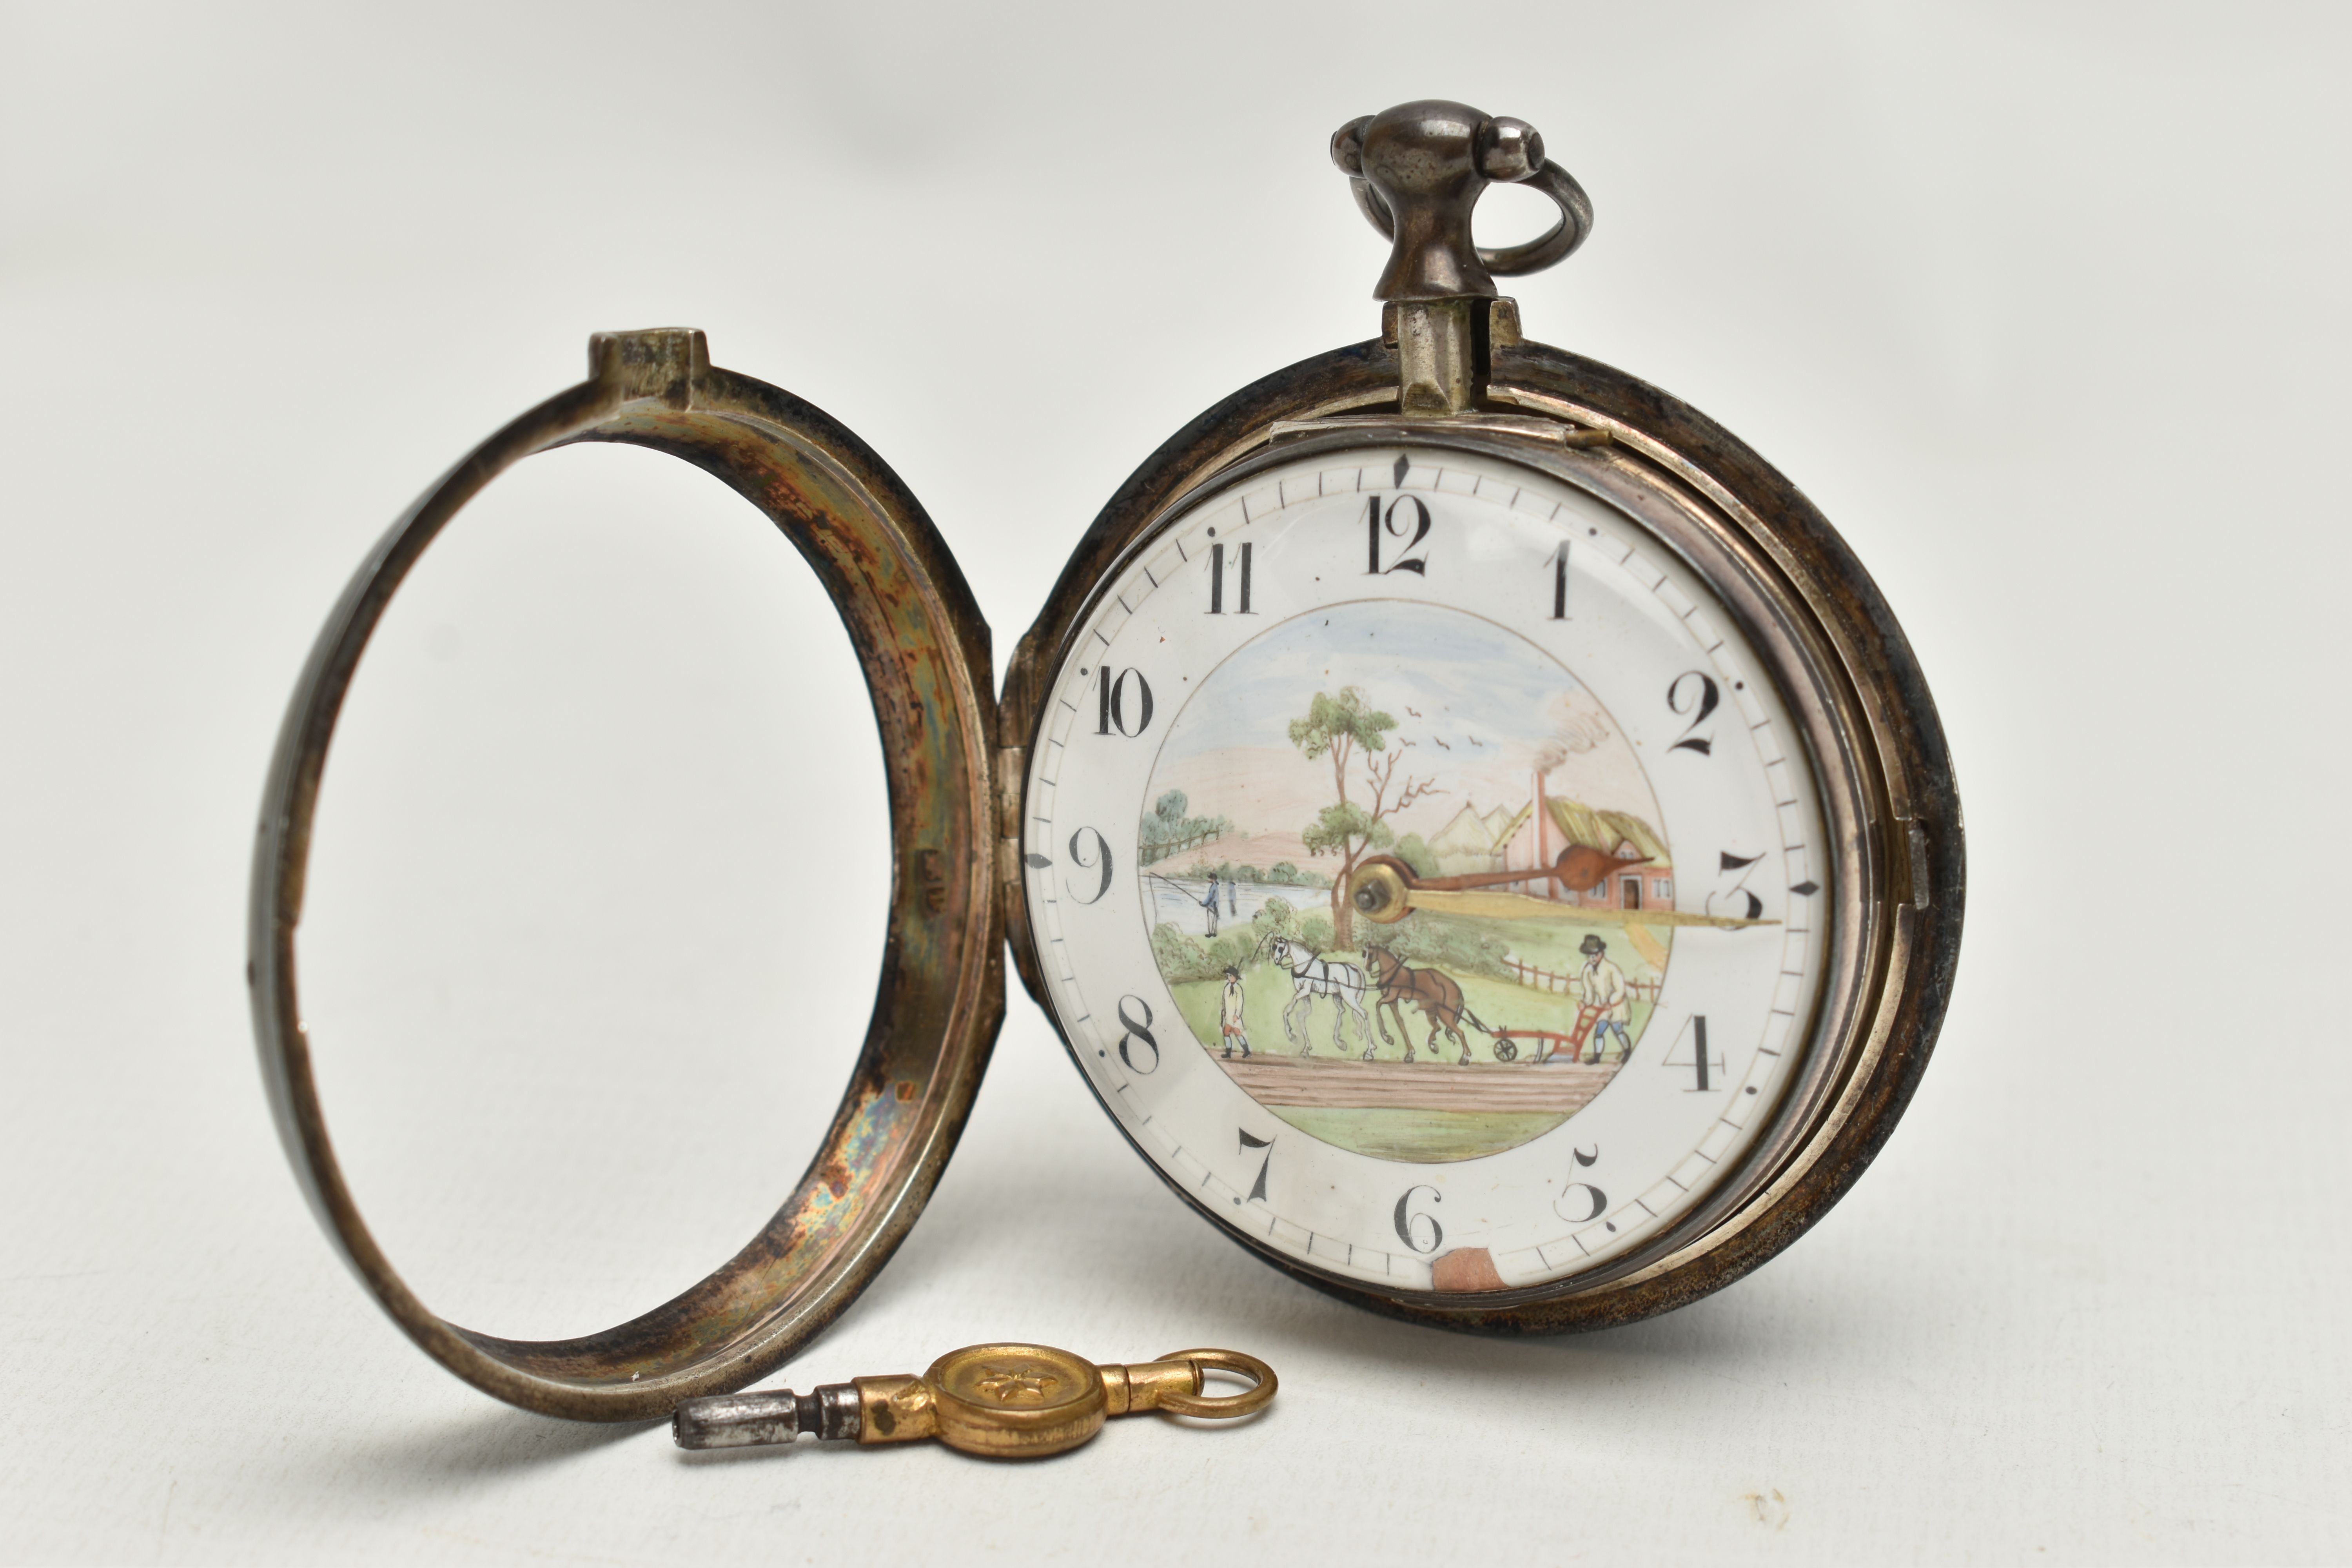 A GEORGE III SILVER PAIR CASED POCKET WATCH, the white enamel dial with Arabic numerals, painted - Image 3 of 9